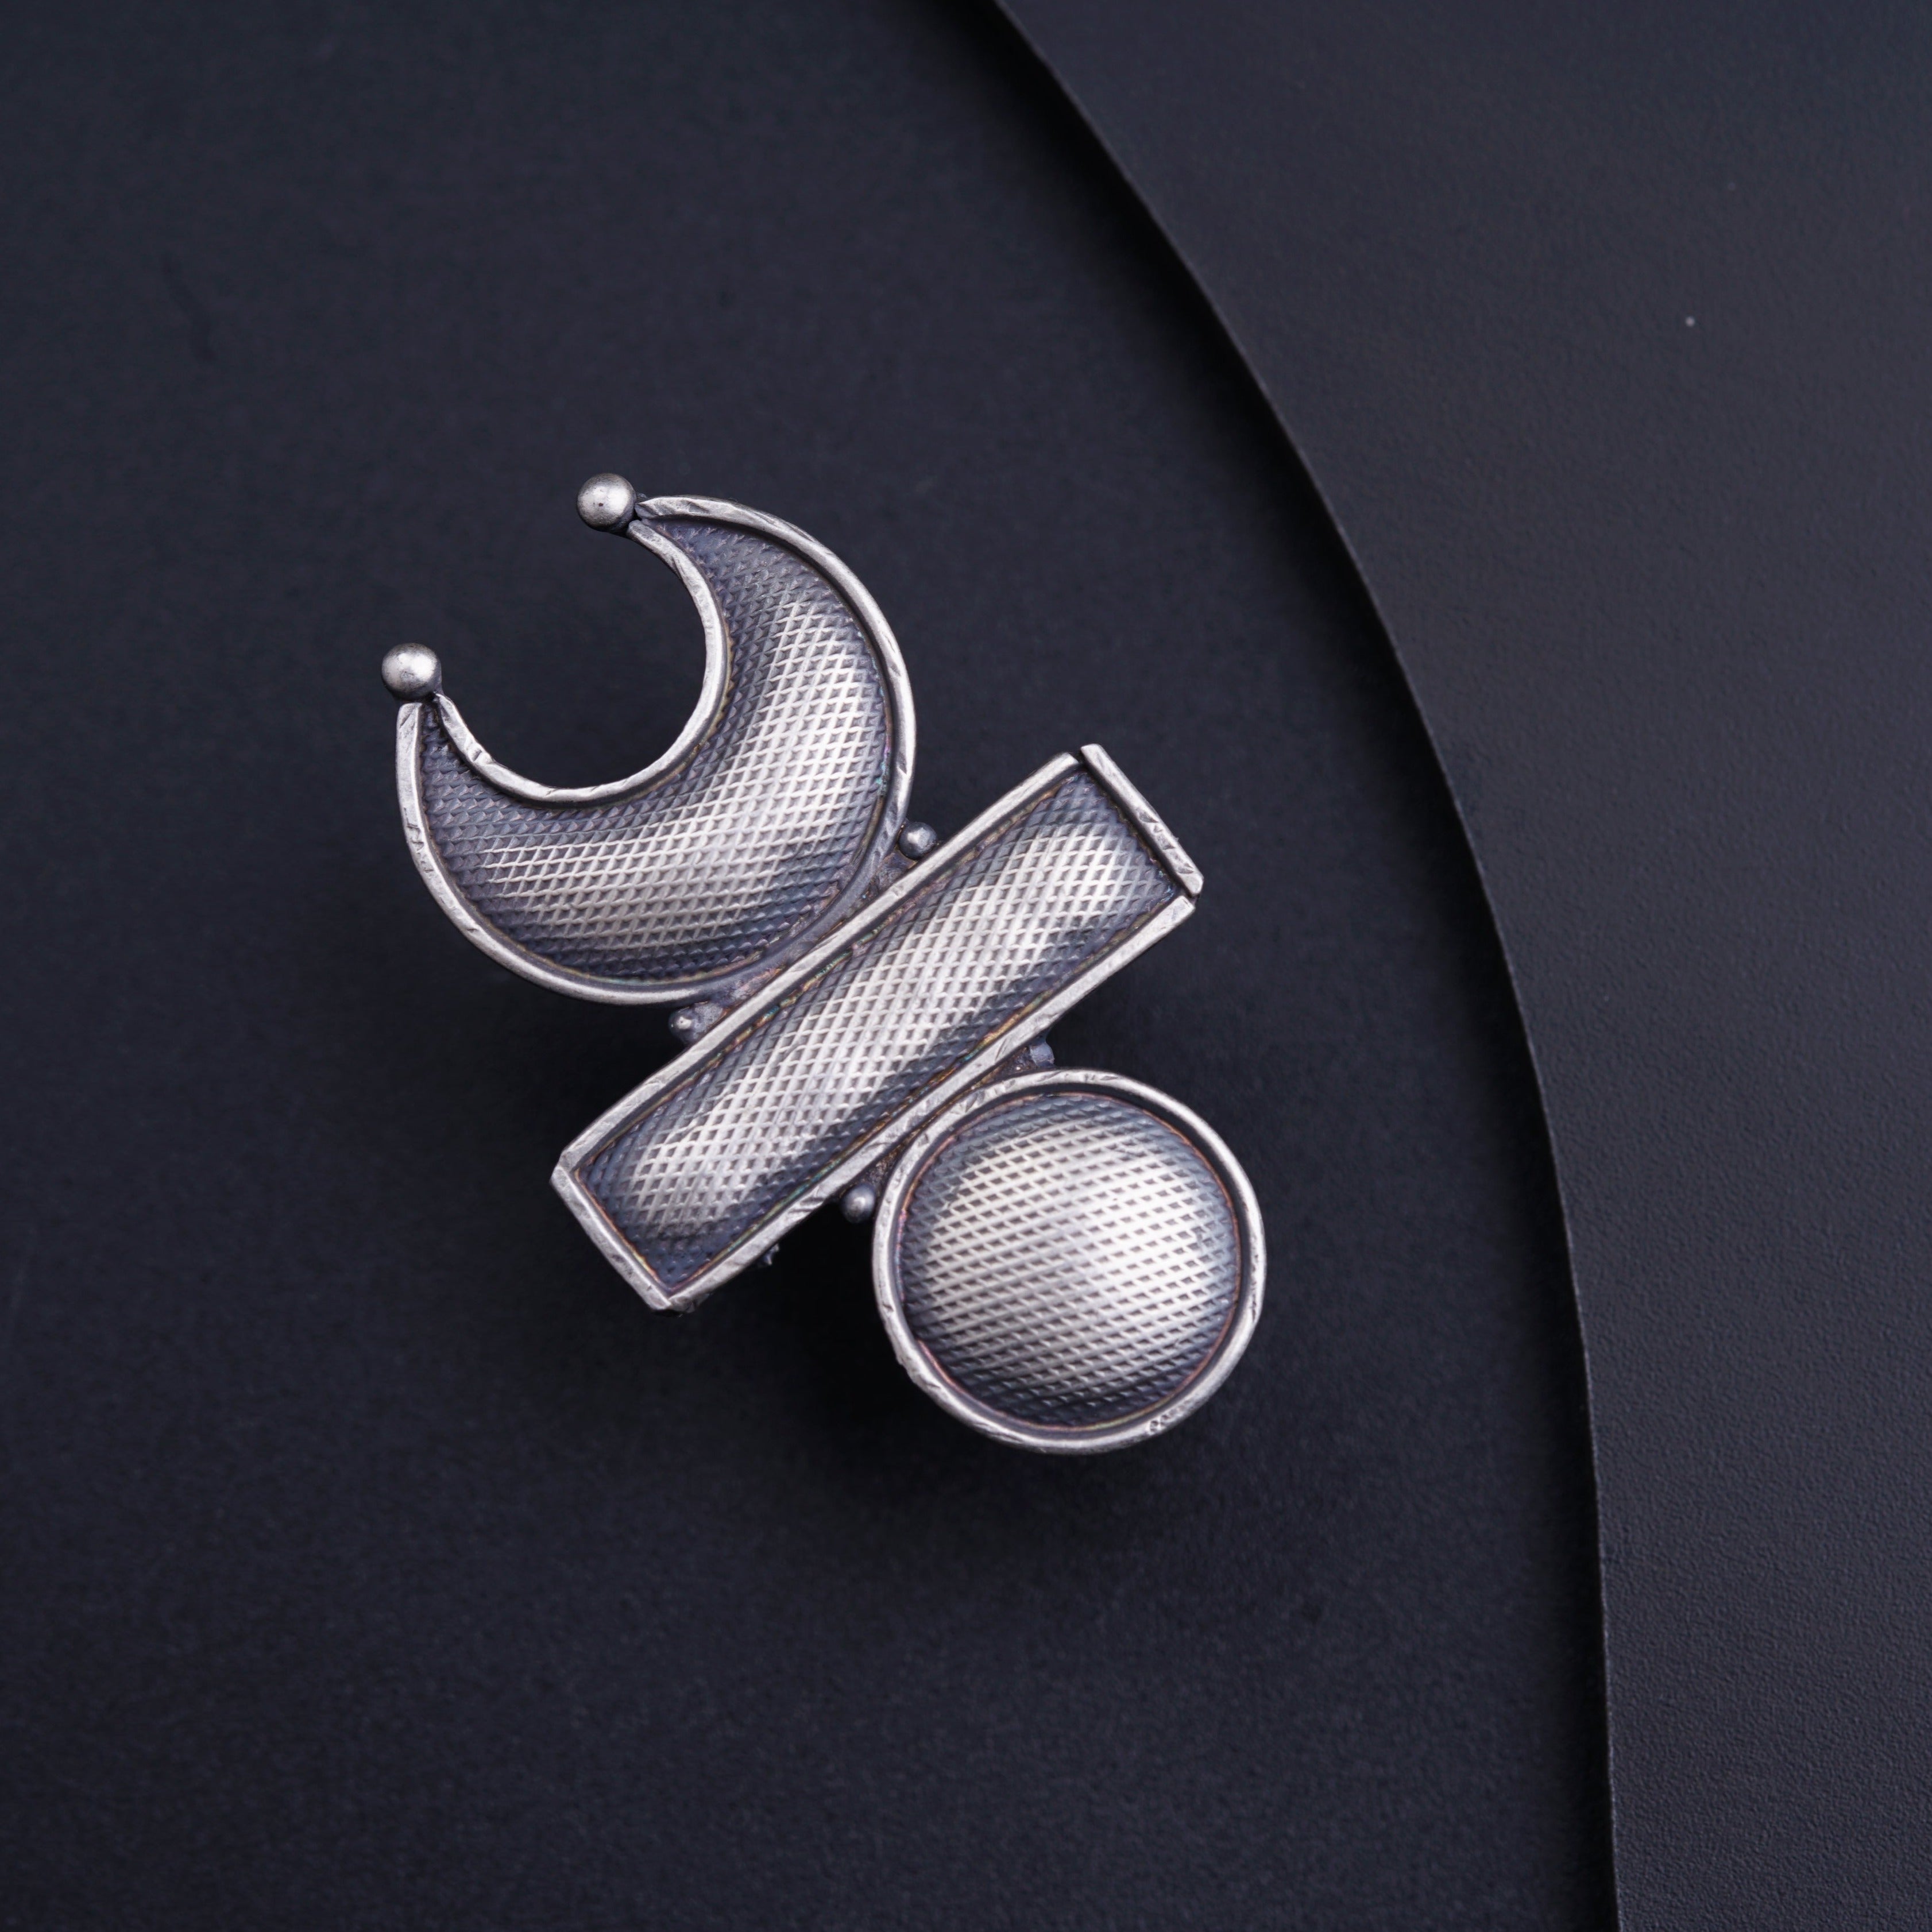 a close up of a silver brooch with a black background